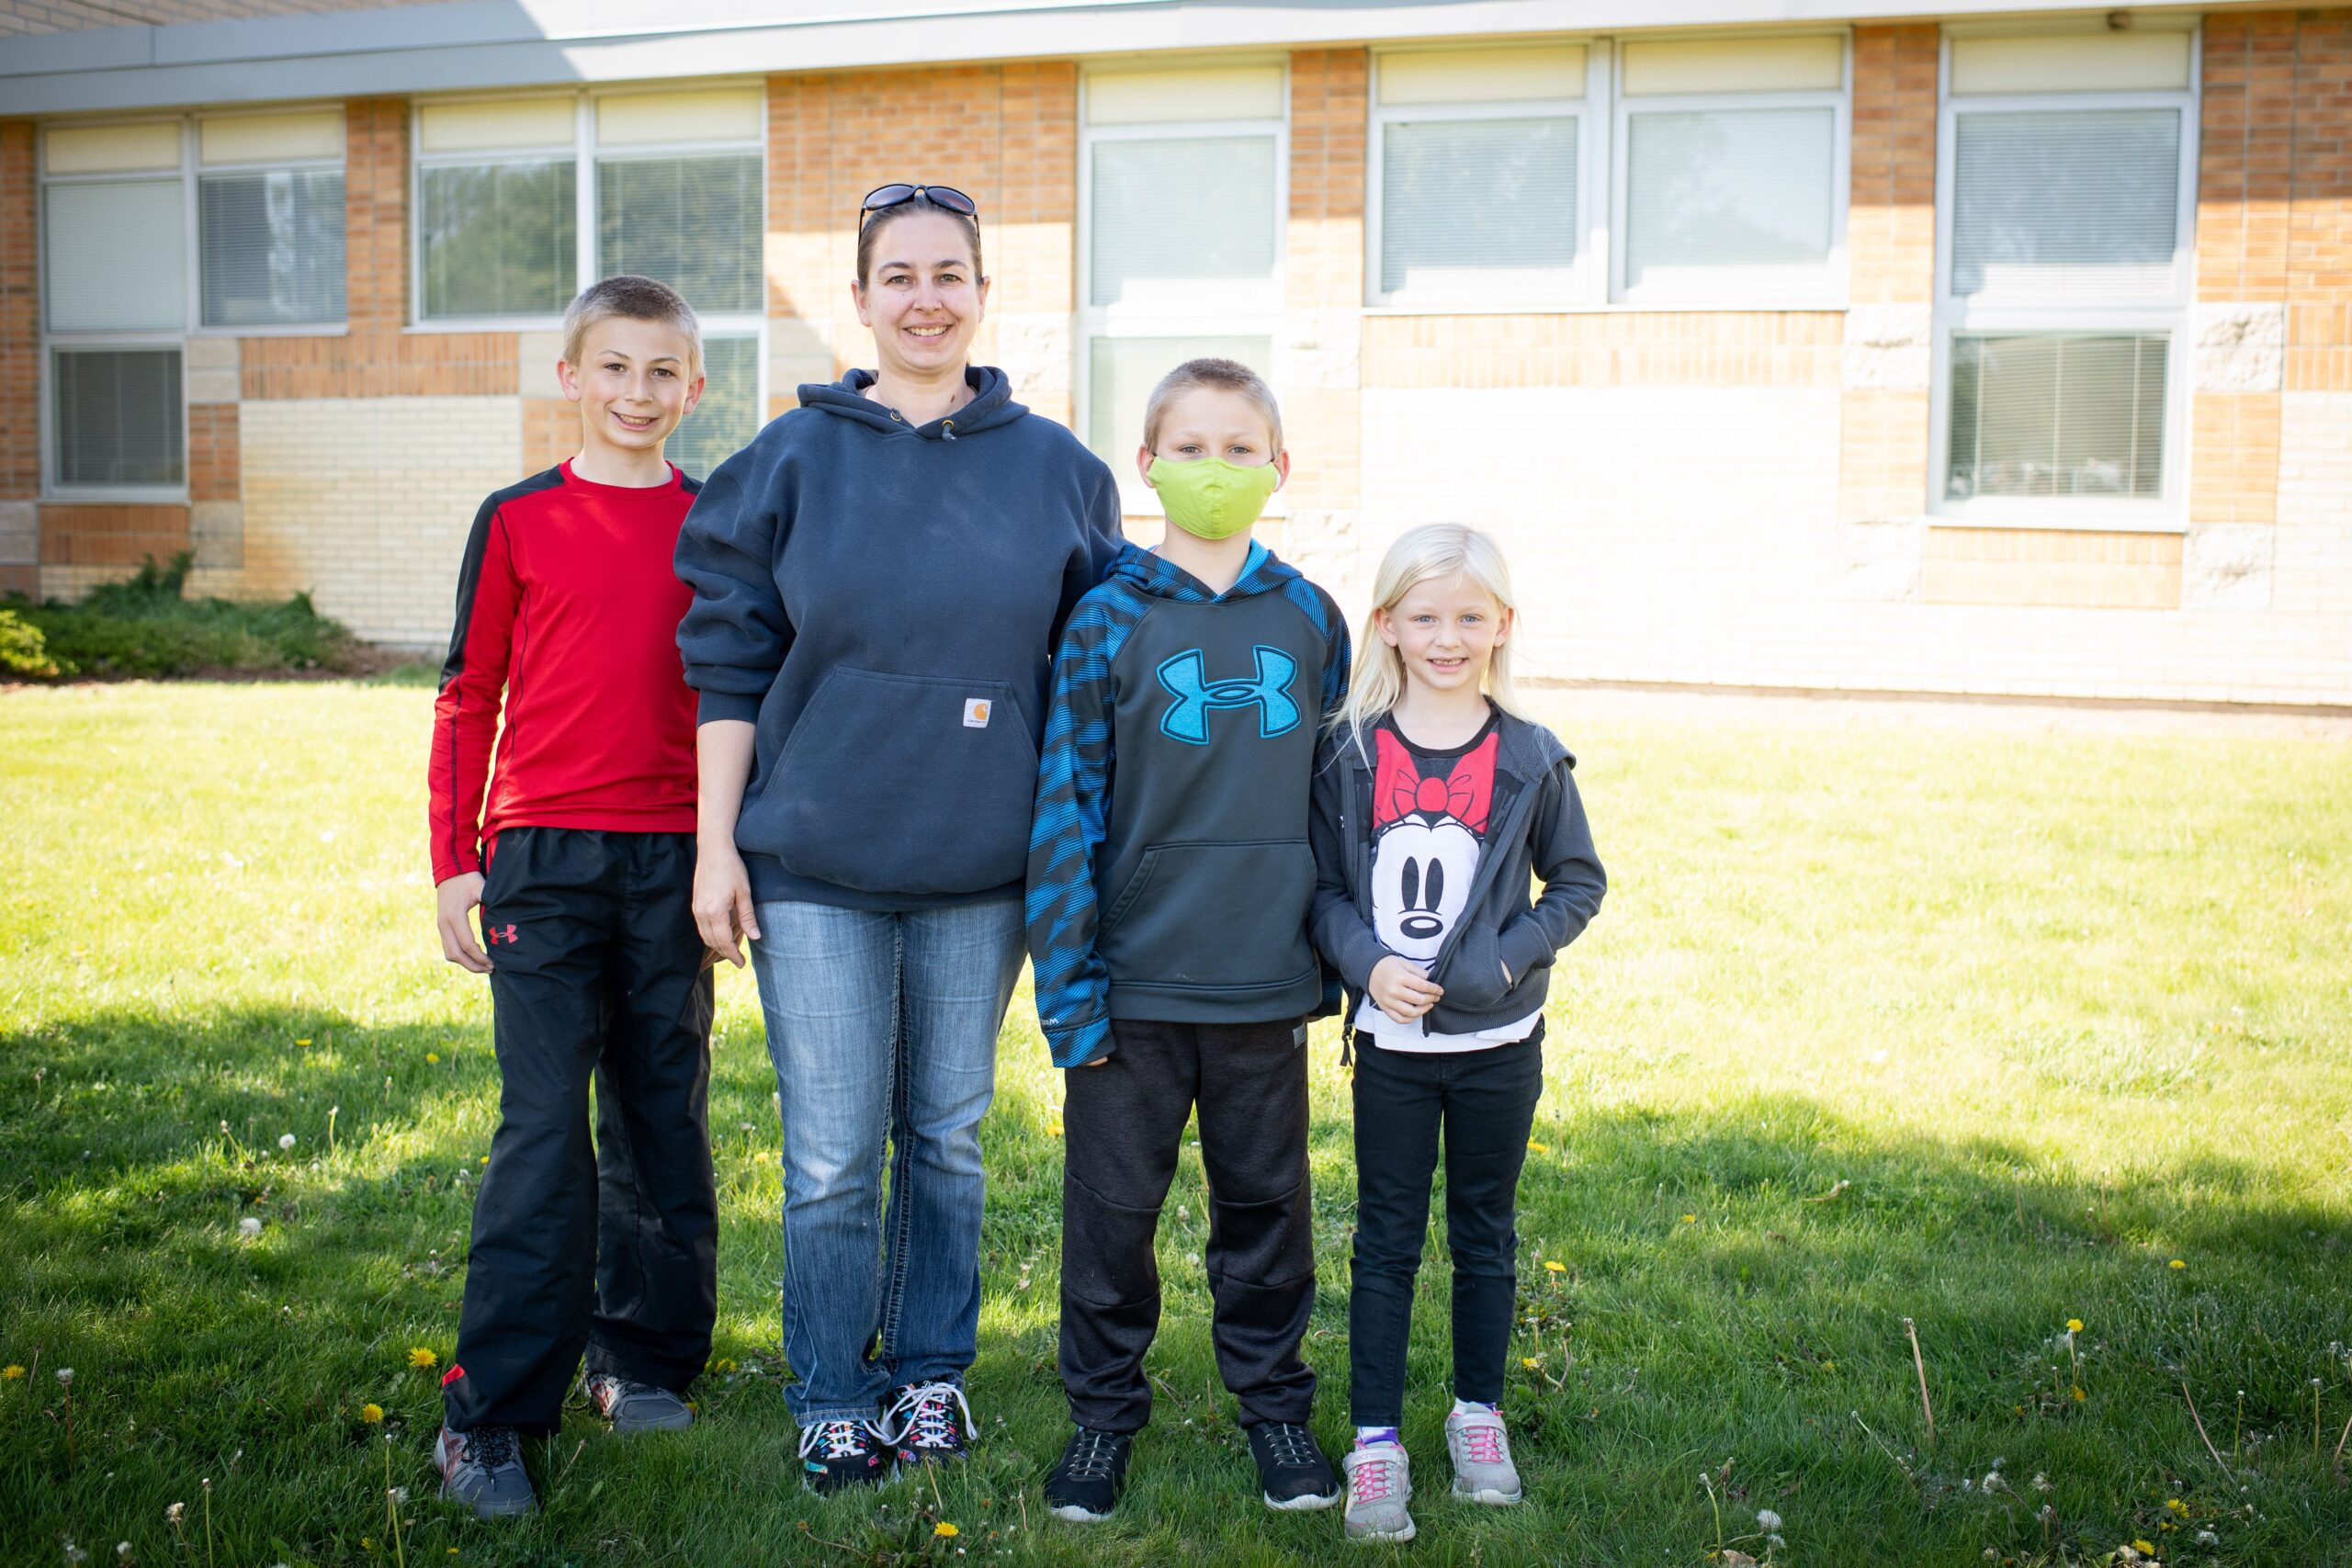 April stands with her three children in front of the school